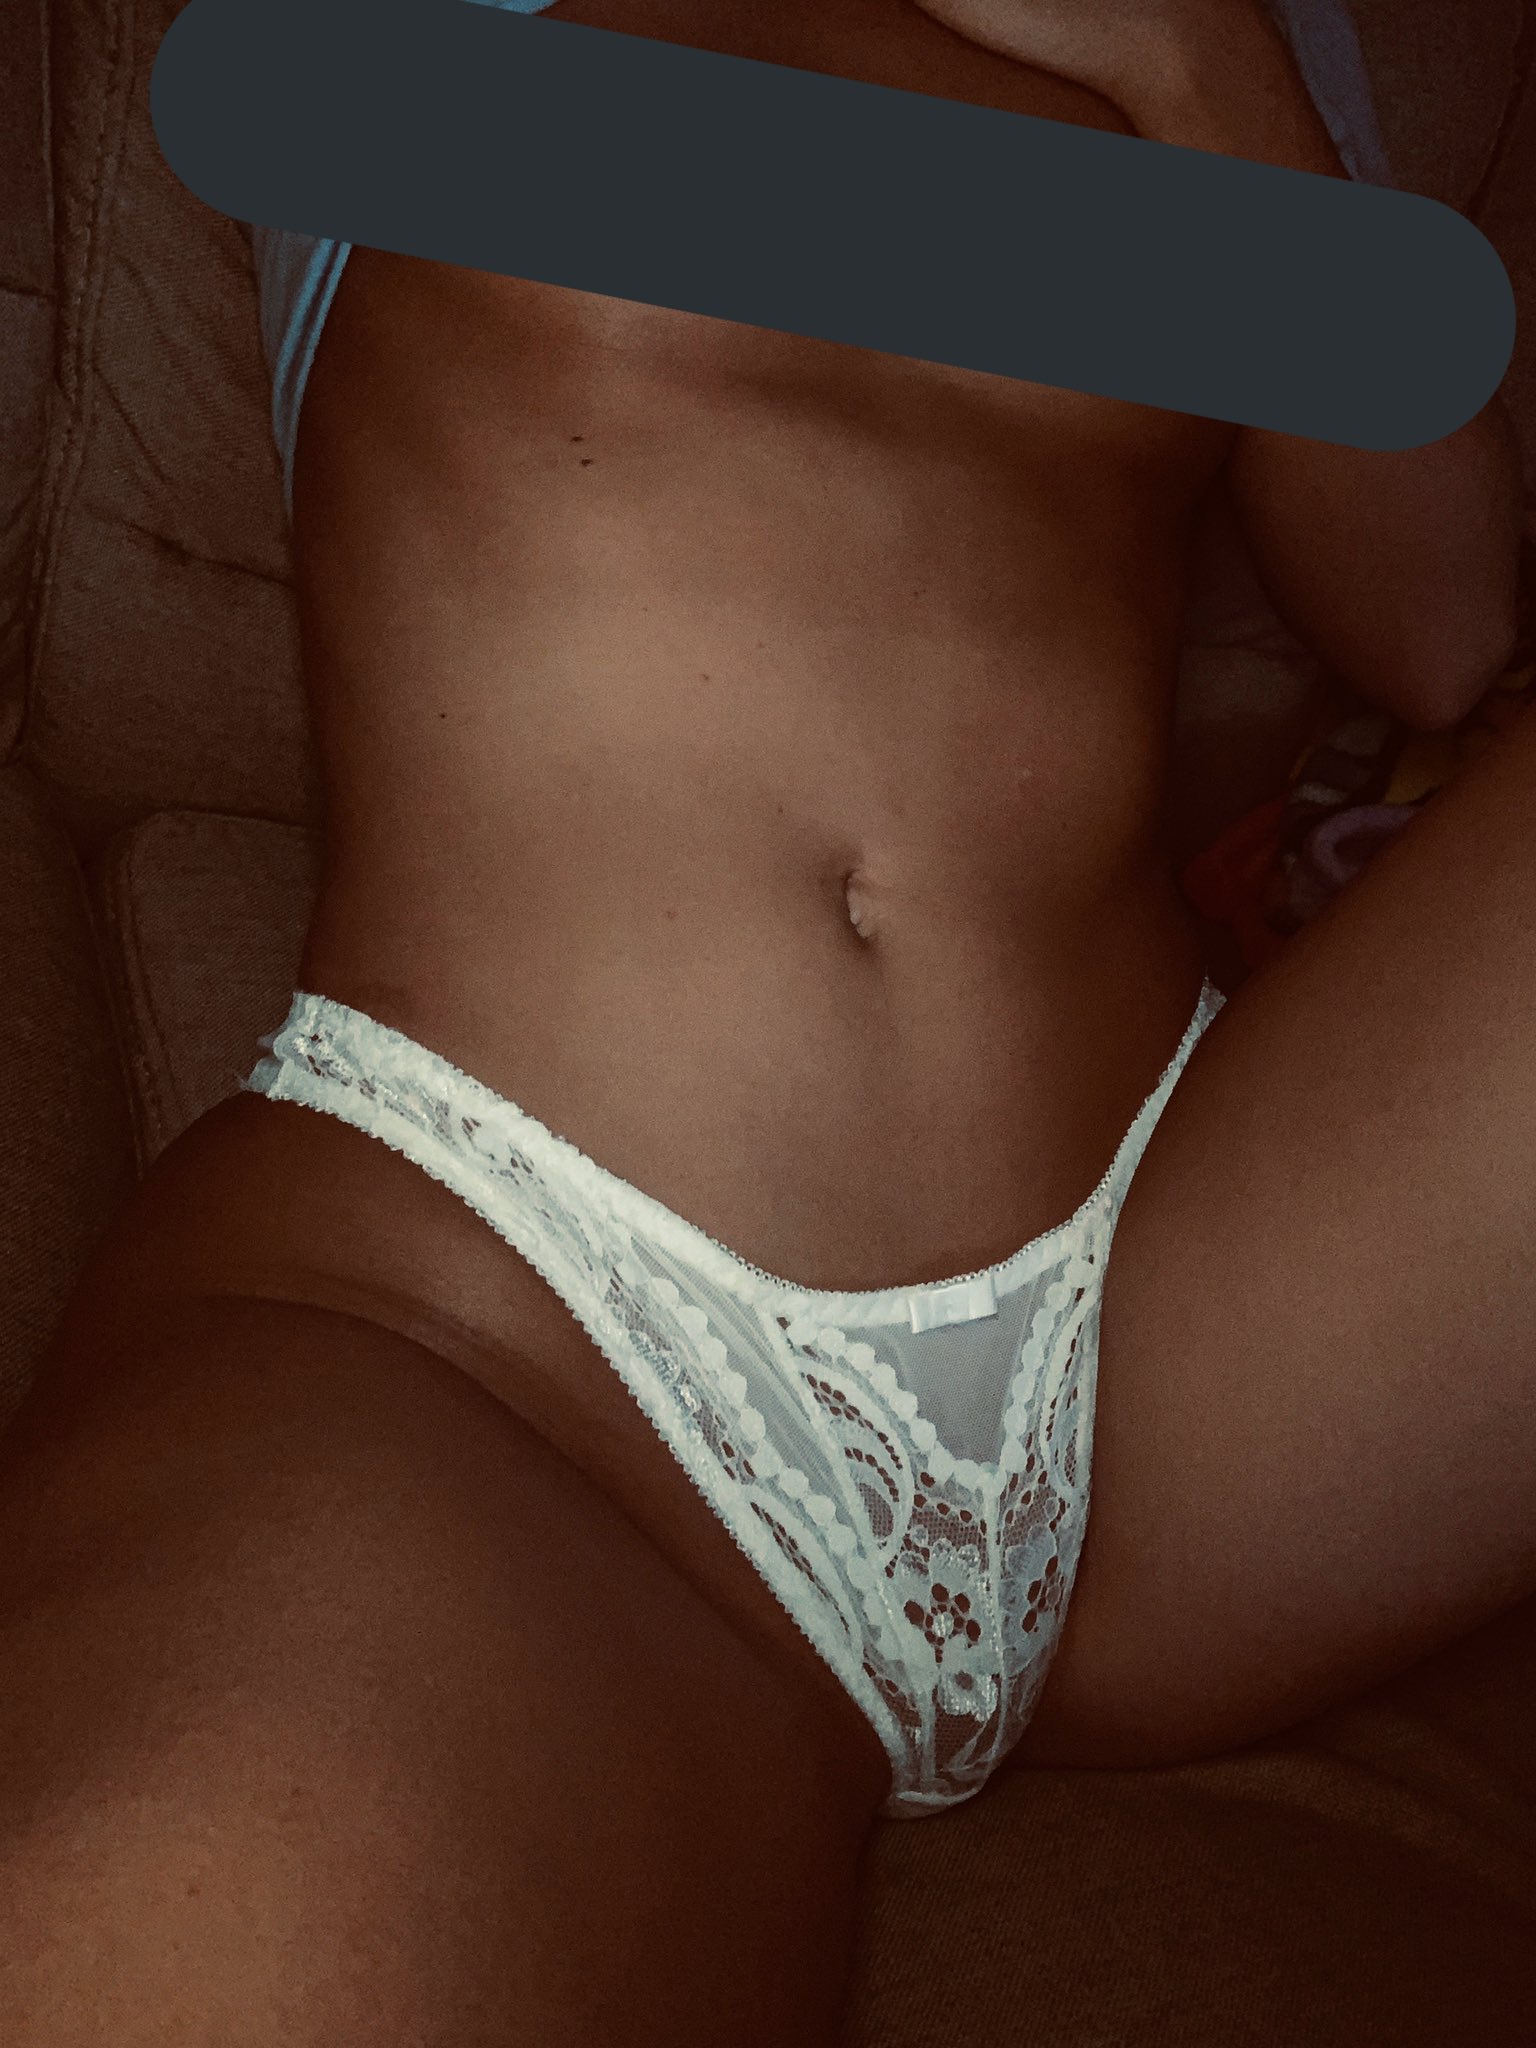 ✩𝐁𝐚𝐢𝐥𝐞𝐲 𝐁𝐨𝐨𝐭𝐥𝐞𝐬✩ on X: Issa party on OnlyFans Tonight 🥳  t.coUa4T6Nu6GH t.coGguLHPeGiy  X